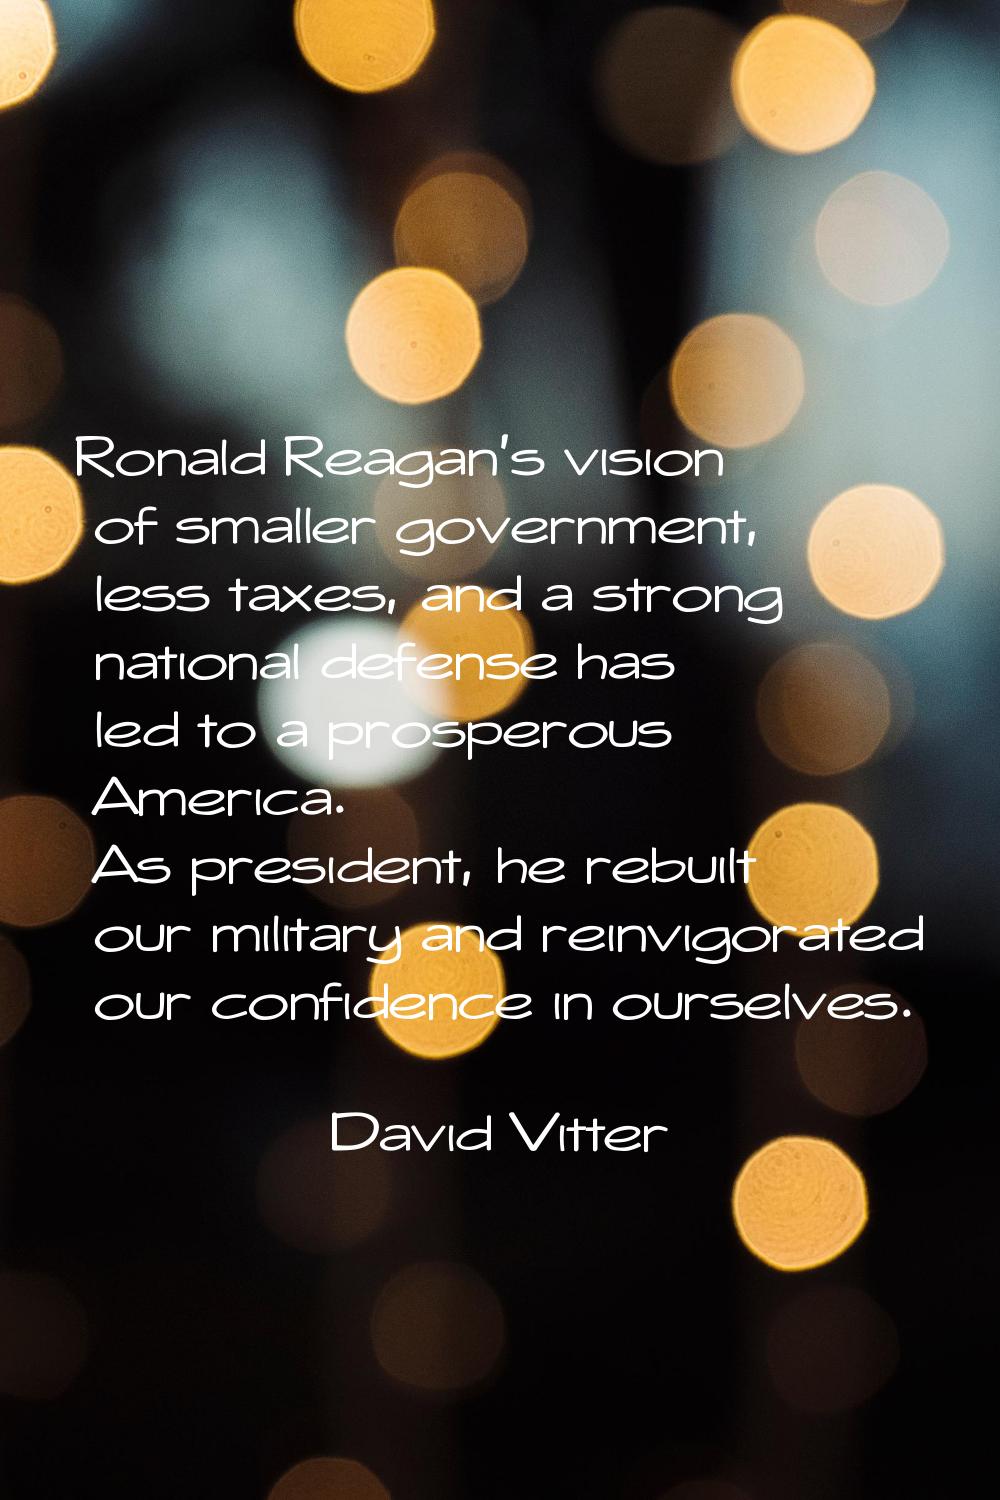 Ronald Reagan's vision of smaller government, less taxes, and a strong national defense has led to 